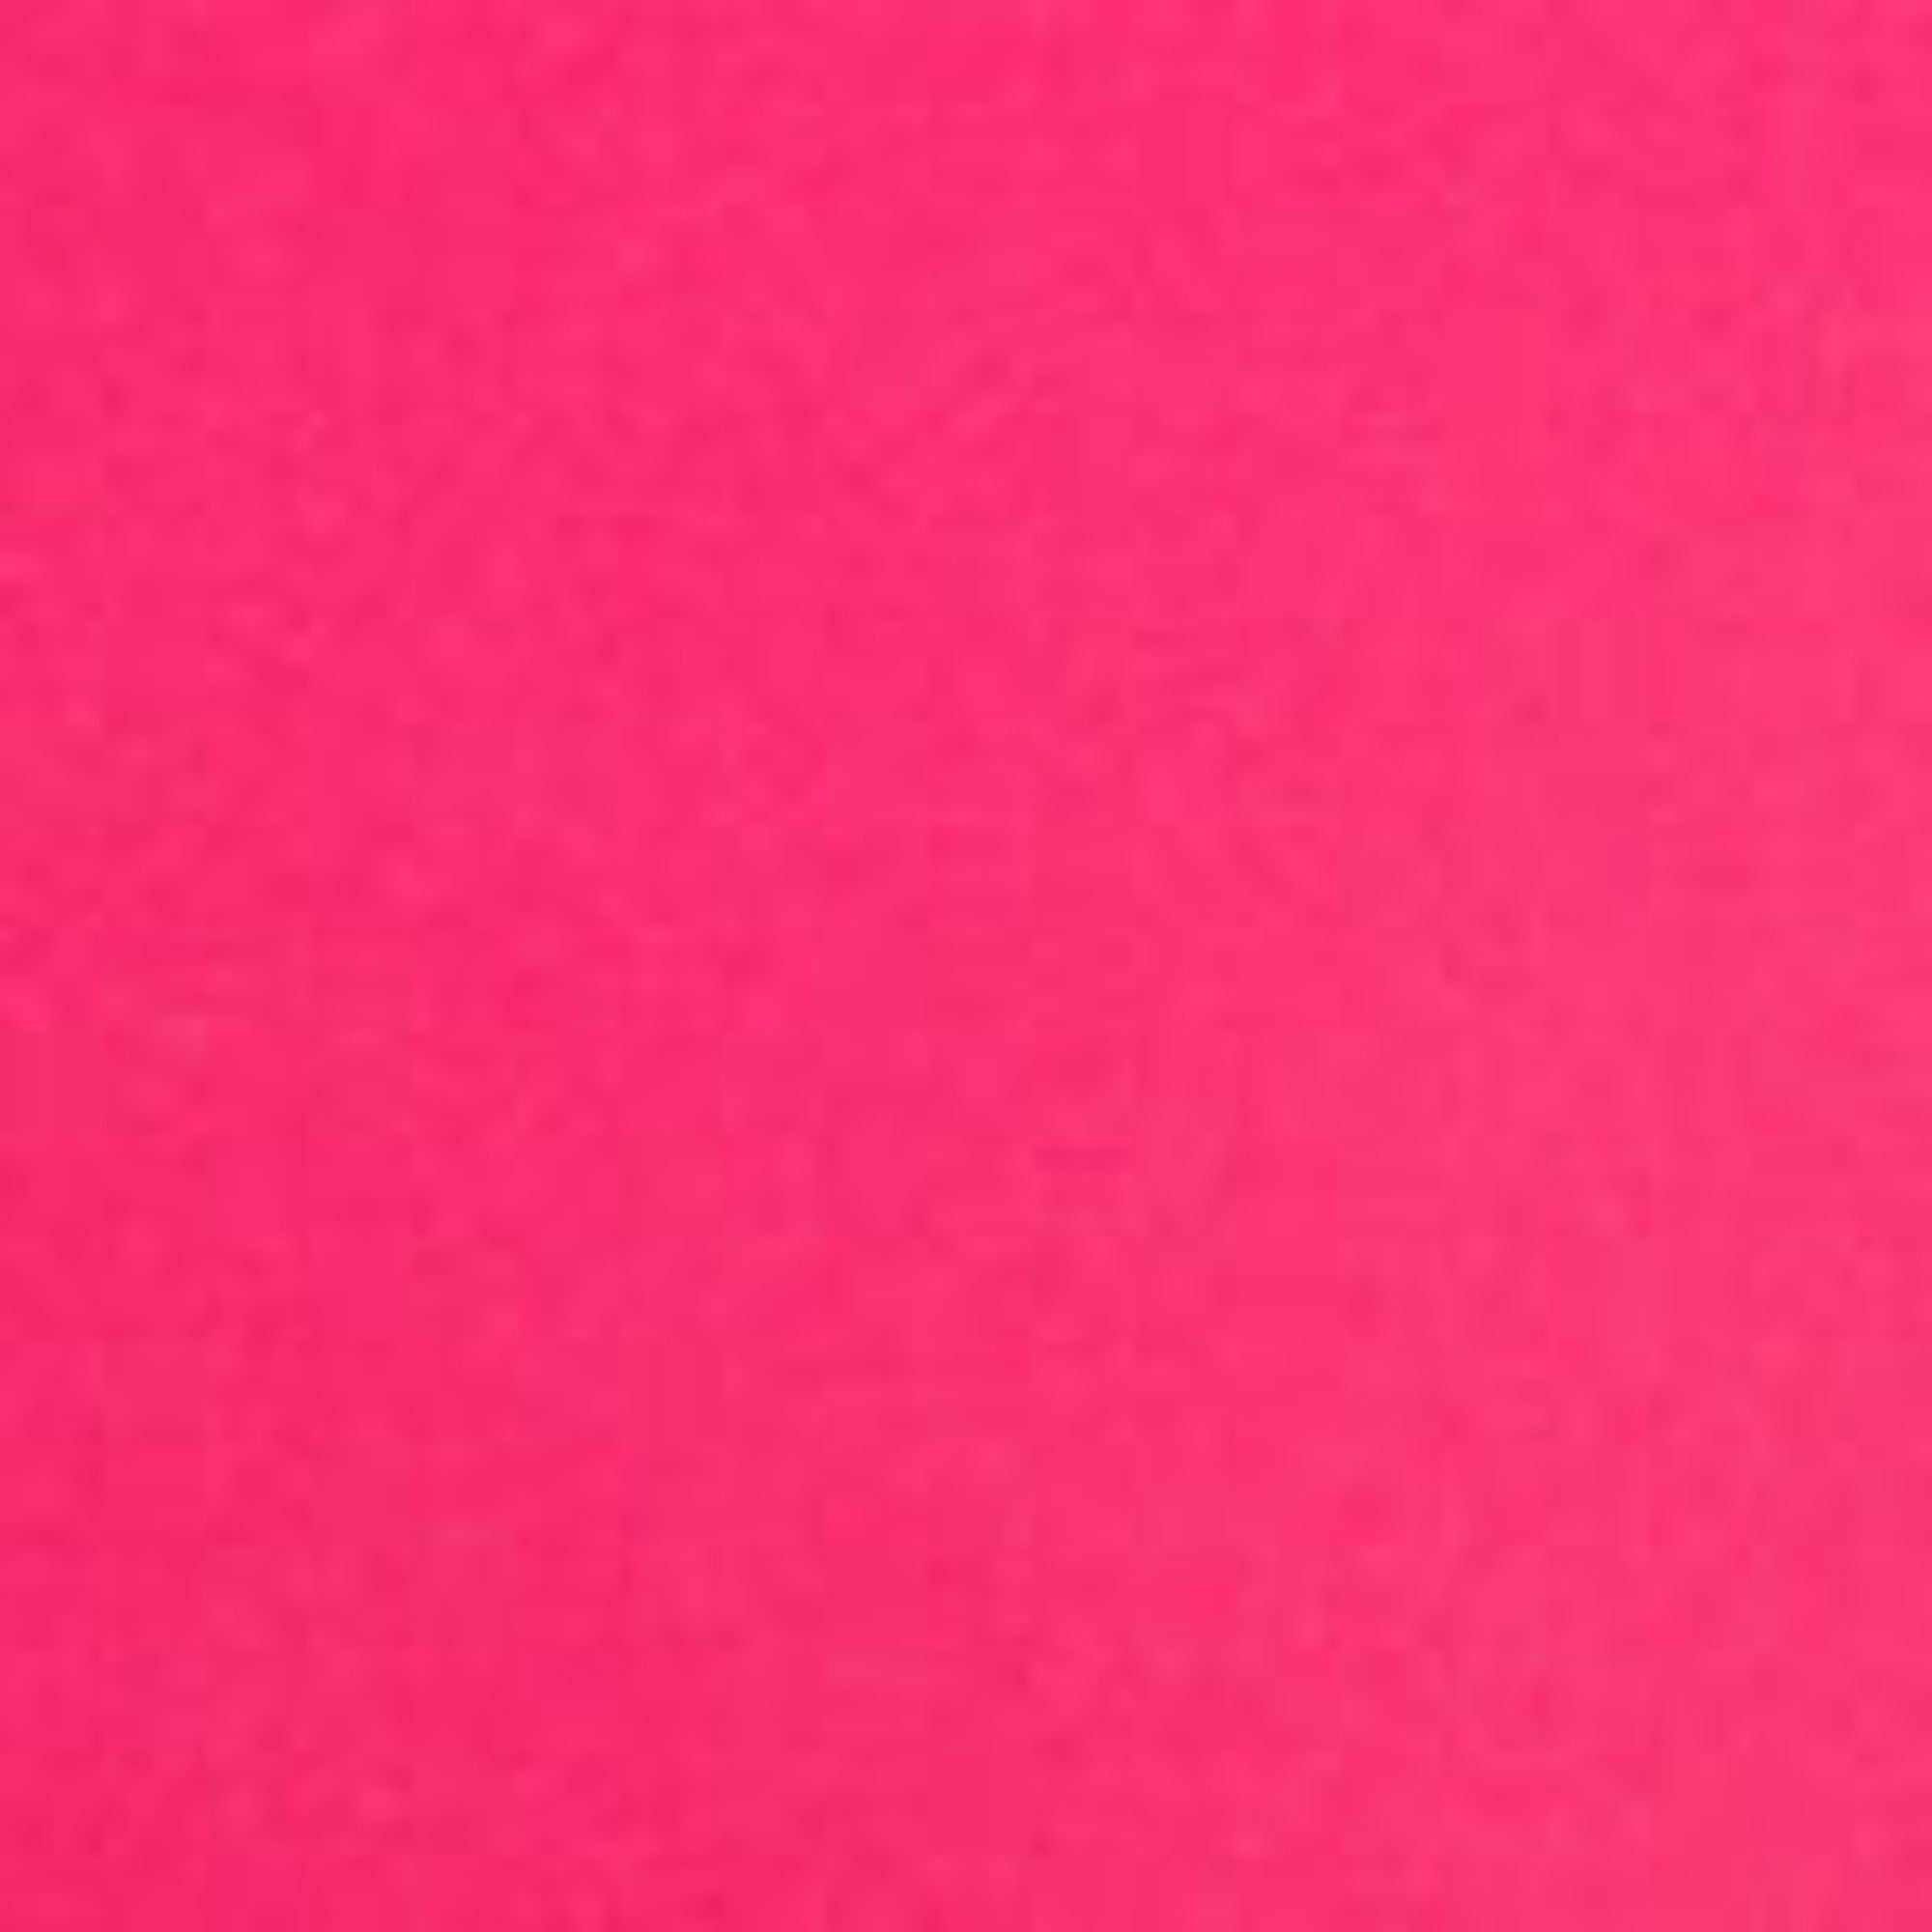 Et Cetera Papers Colorplan Cardstock 100#CV - 10 Sheets - Candy Pink -  20582908